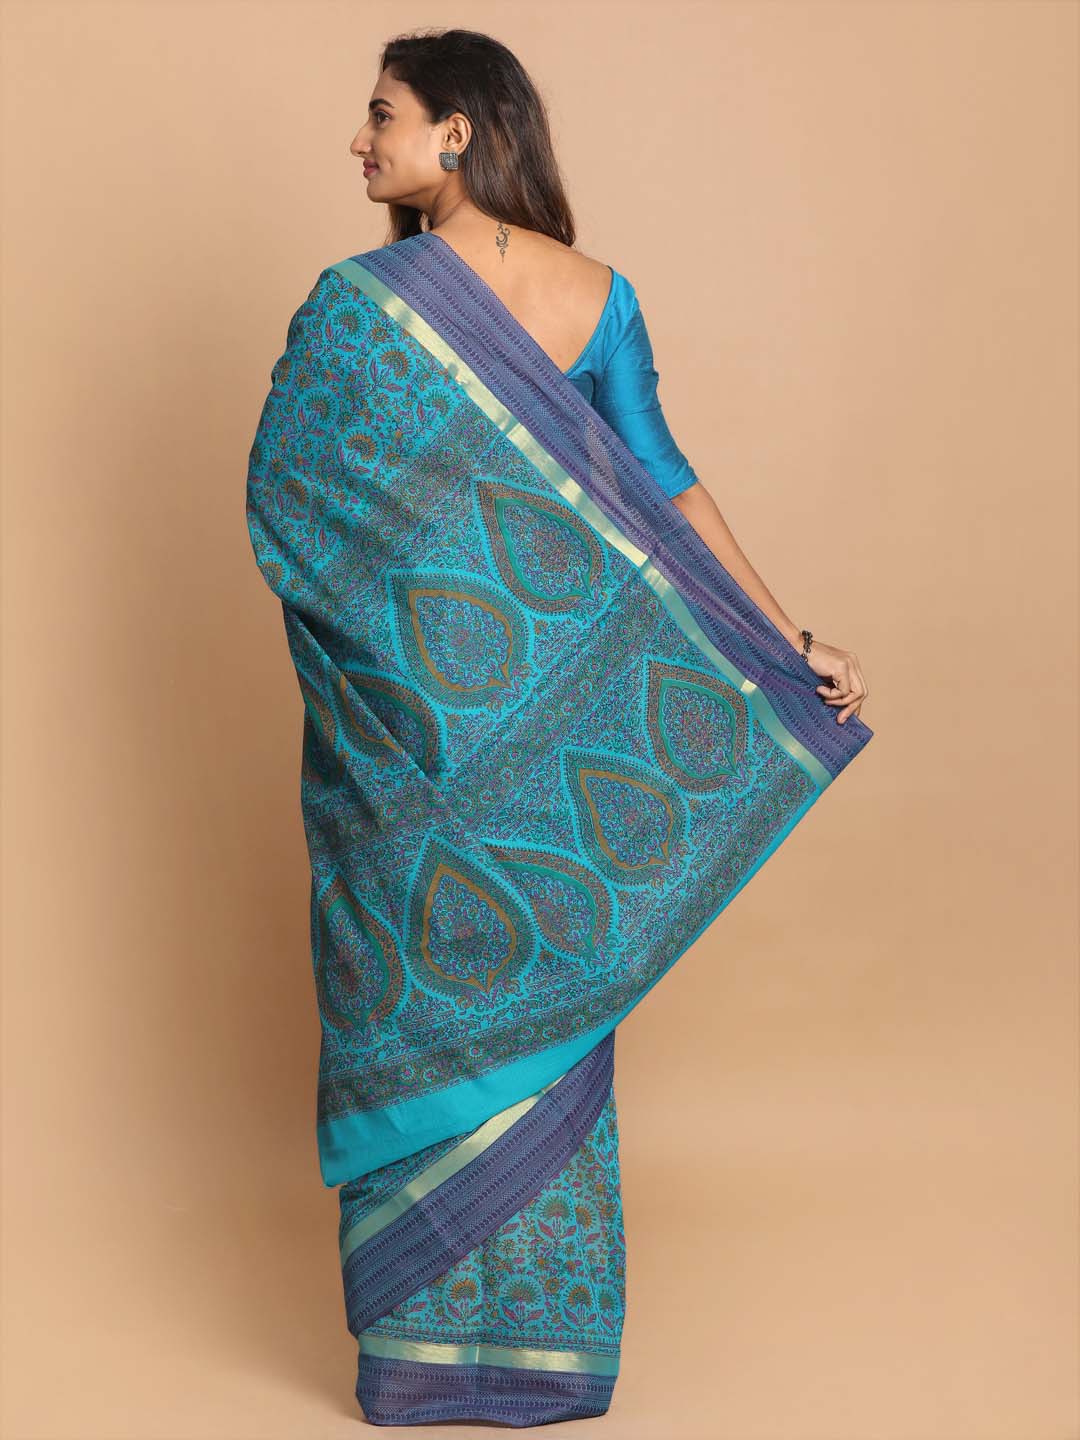 Indethnic Printed Cotton Blend Saree in Turquoise Blue - View 3